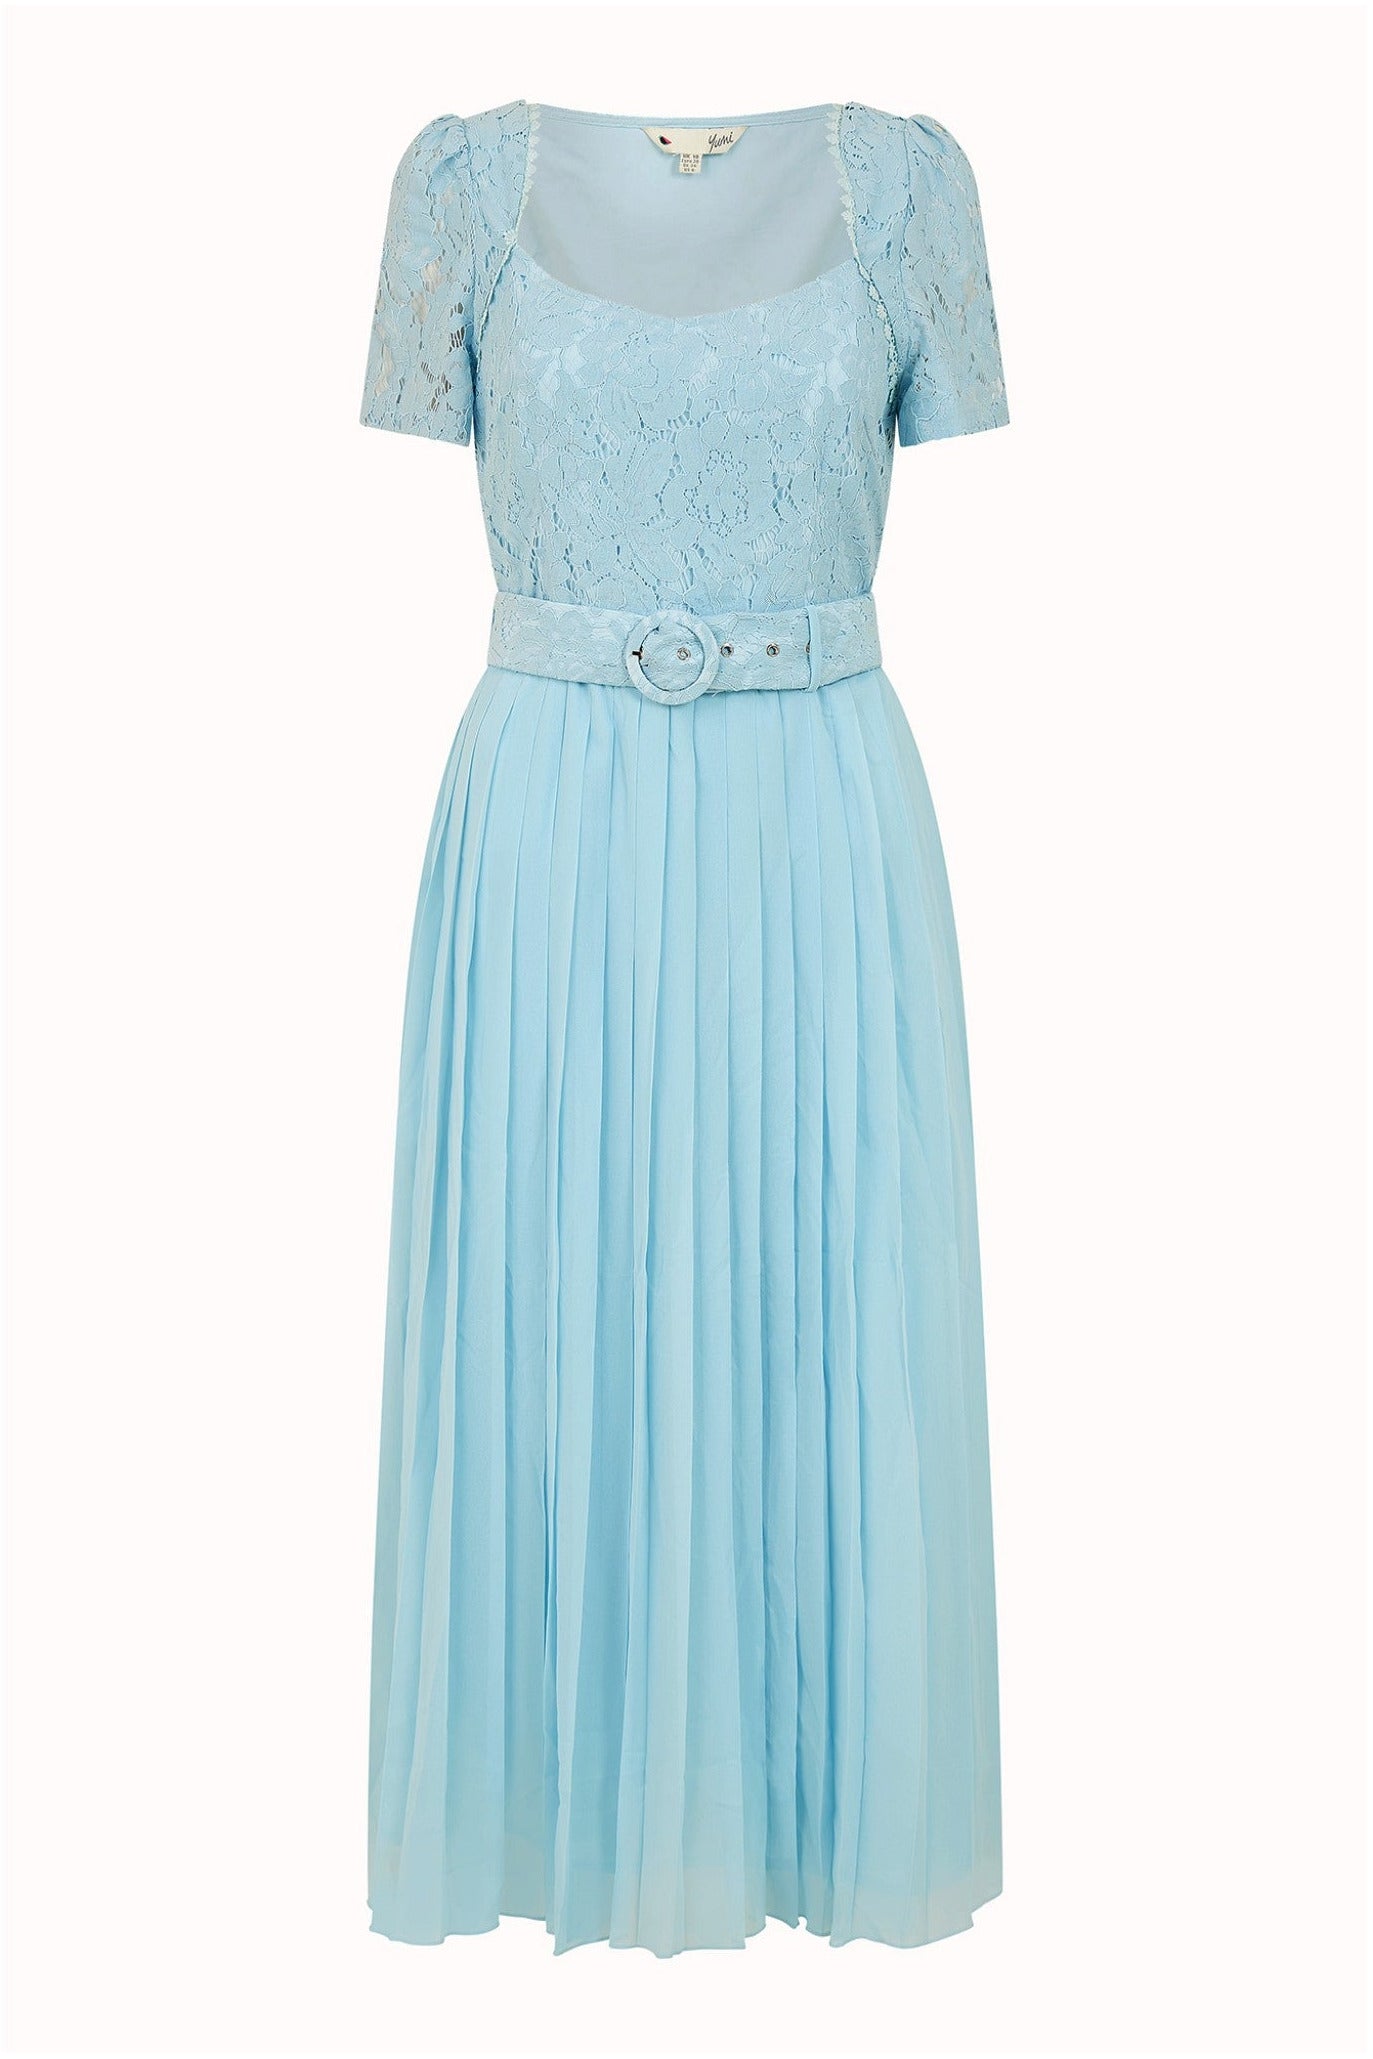 Blue Lace Dress With Pleated Skirt and Belt Yumi